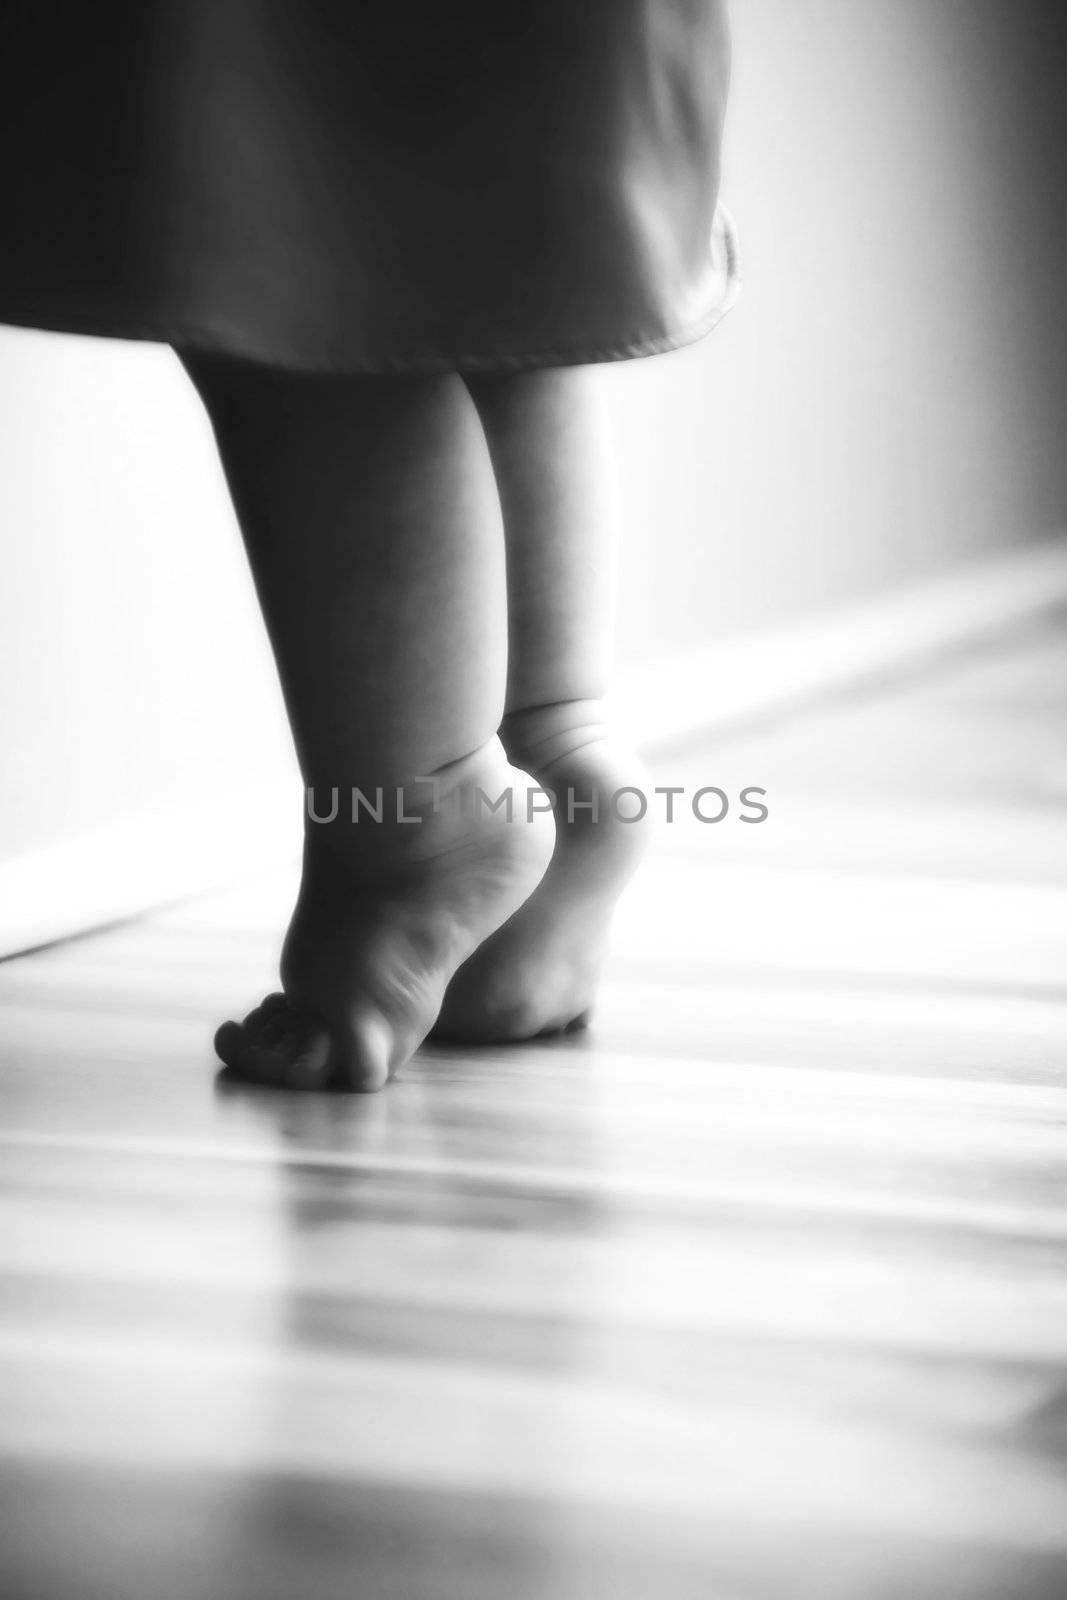 Baby Feet Stretching on Wooden Floor black and white